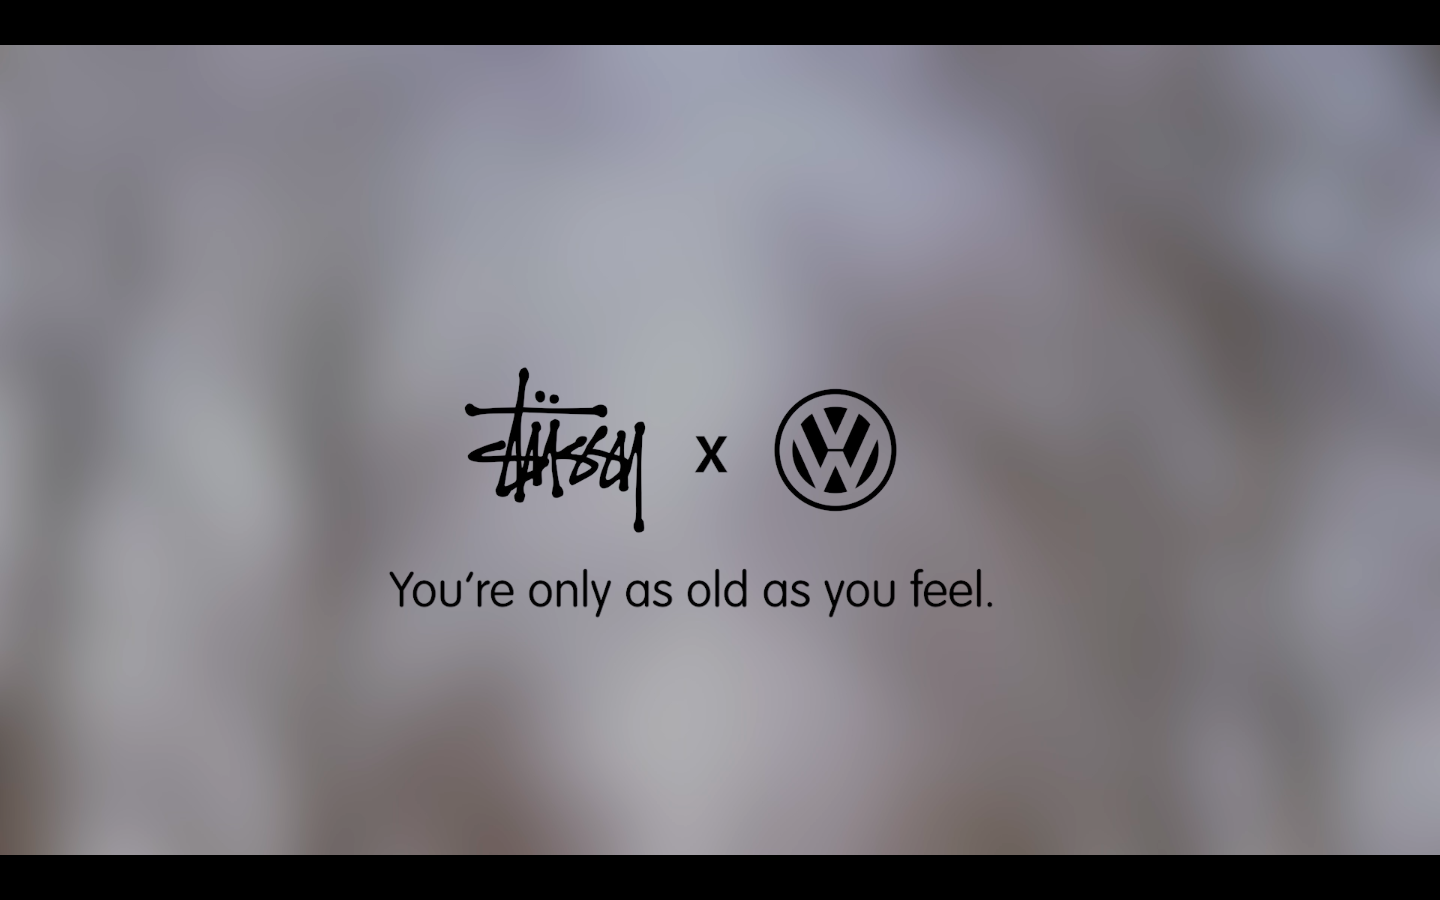 BA Fashion Communication and Promotion work by Joseph Corlito. A final film from the project, 'You're only as old as you feel.', a collaborative campaign between Stussy and Volkswagen. The film follows Chloe and Lewis, an engaged couple from Dereham, Norfolk who each own a classic Volkswagen.